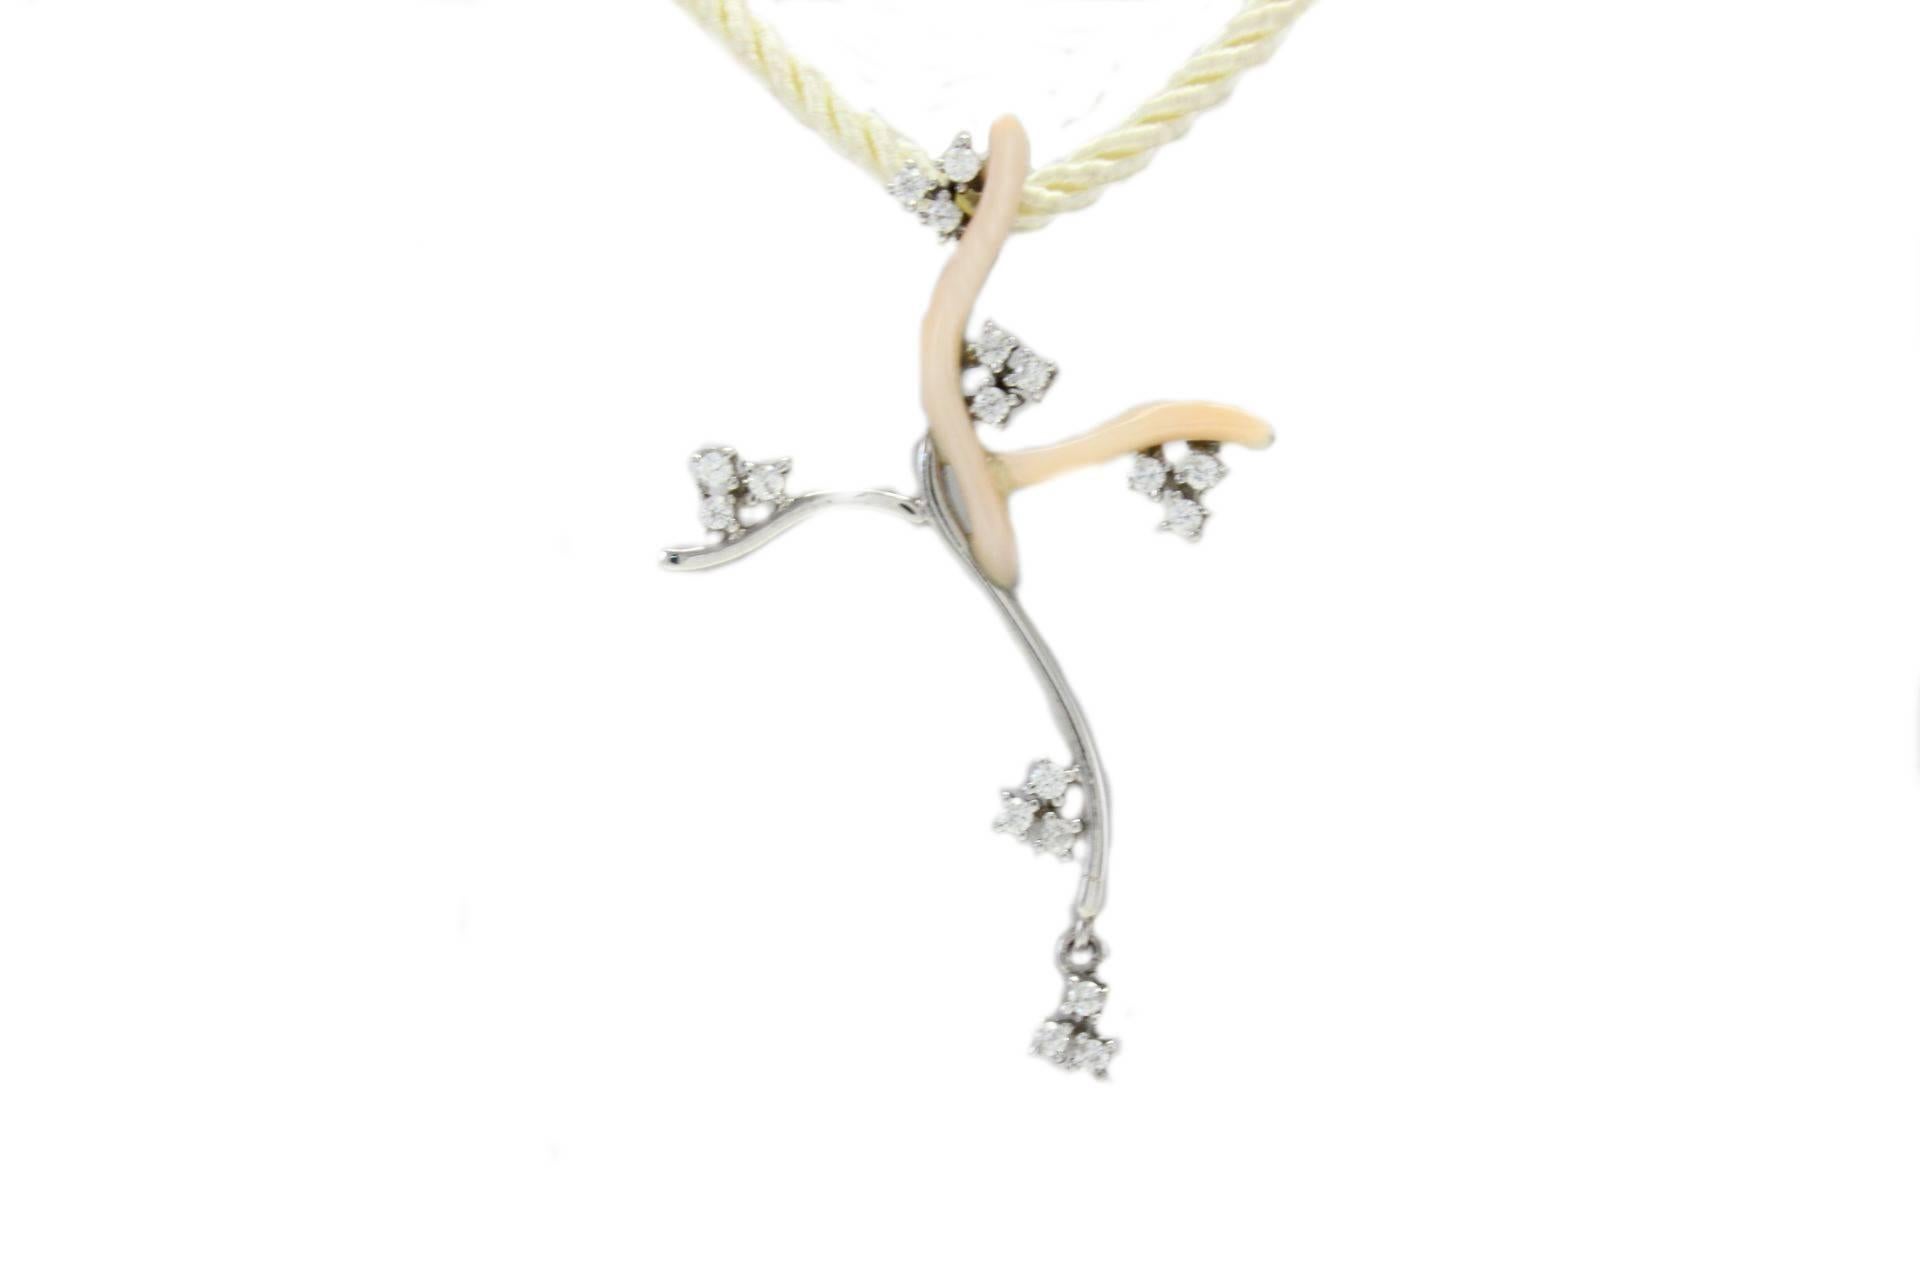 Stylizated cross shaped pendant in 18kt white gold and pink coral embellished with diamonds.

diamonds 0.30kt
tot weight 3.5gr
r.f. raa